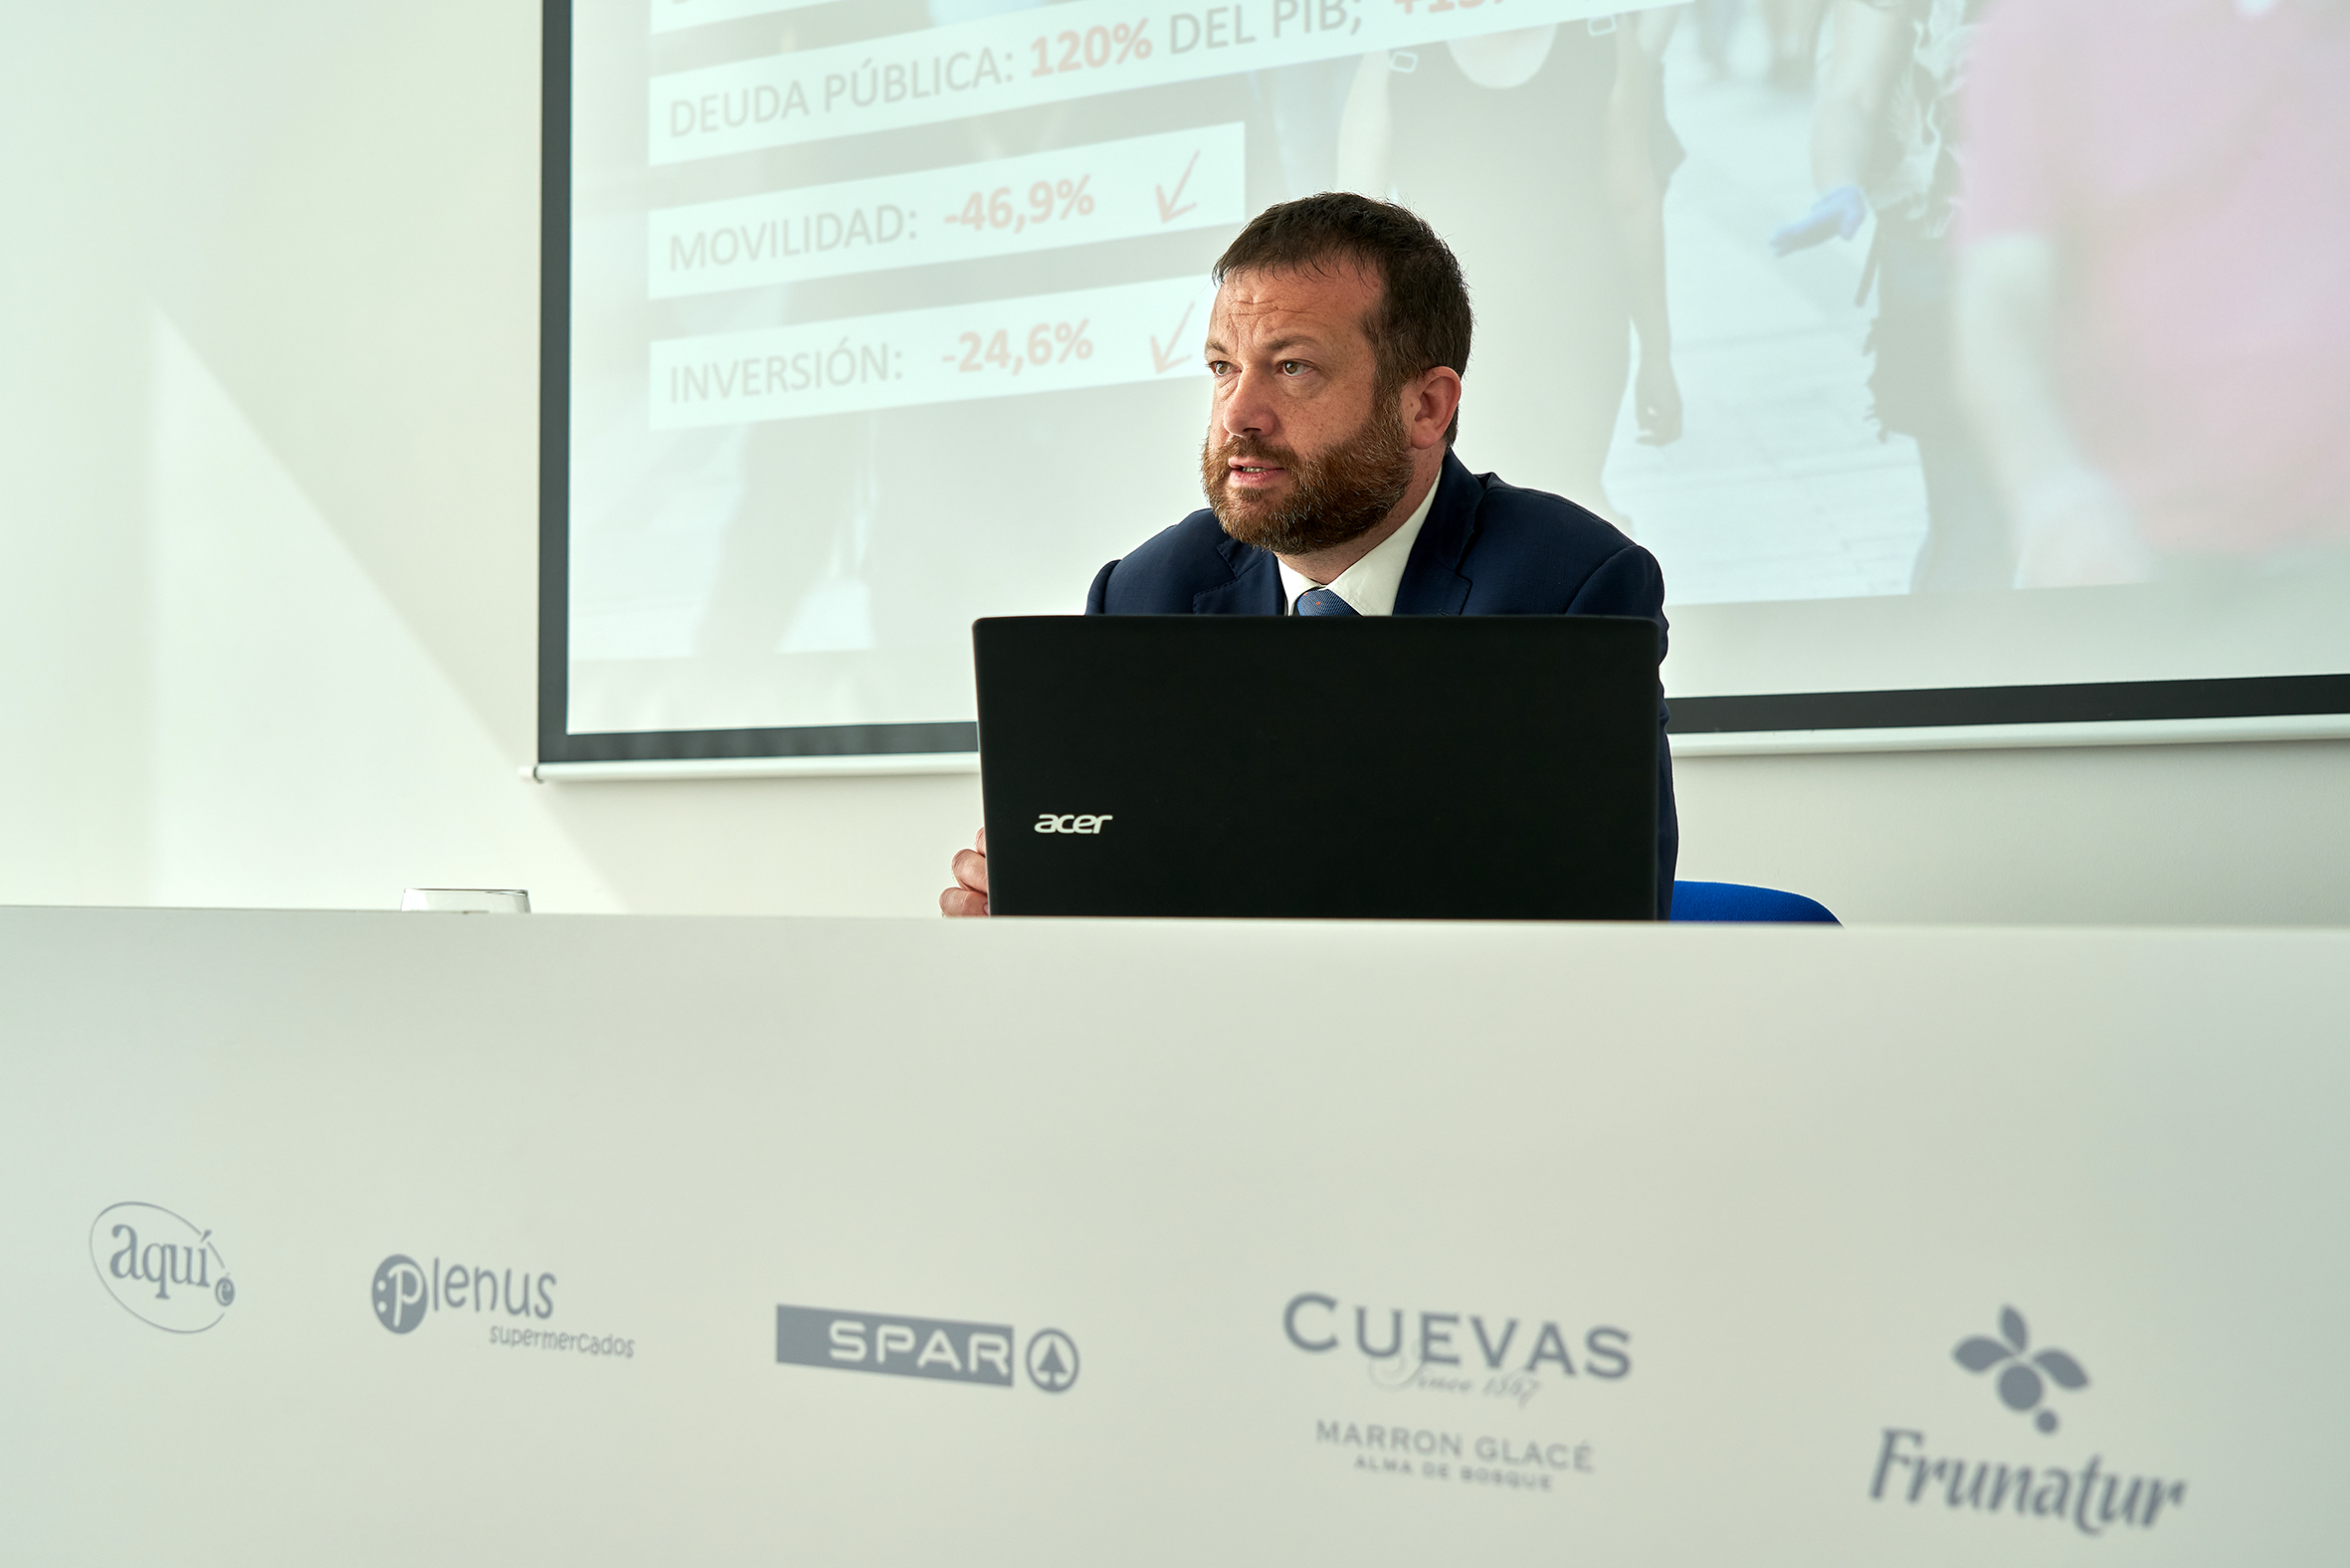 ARTUR YUSTE TALKS ON CADENA COPE ABOUT THE GRUPO CUEVAS RESULTS FOR THE 2020 FINANCIAL YEAR